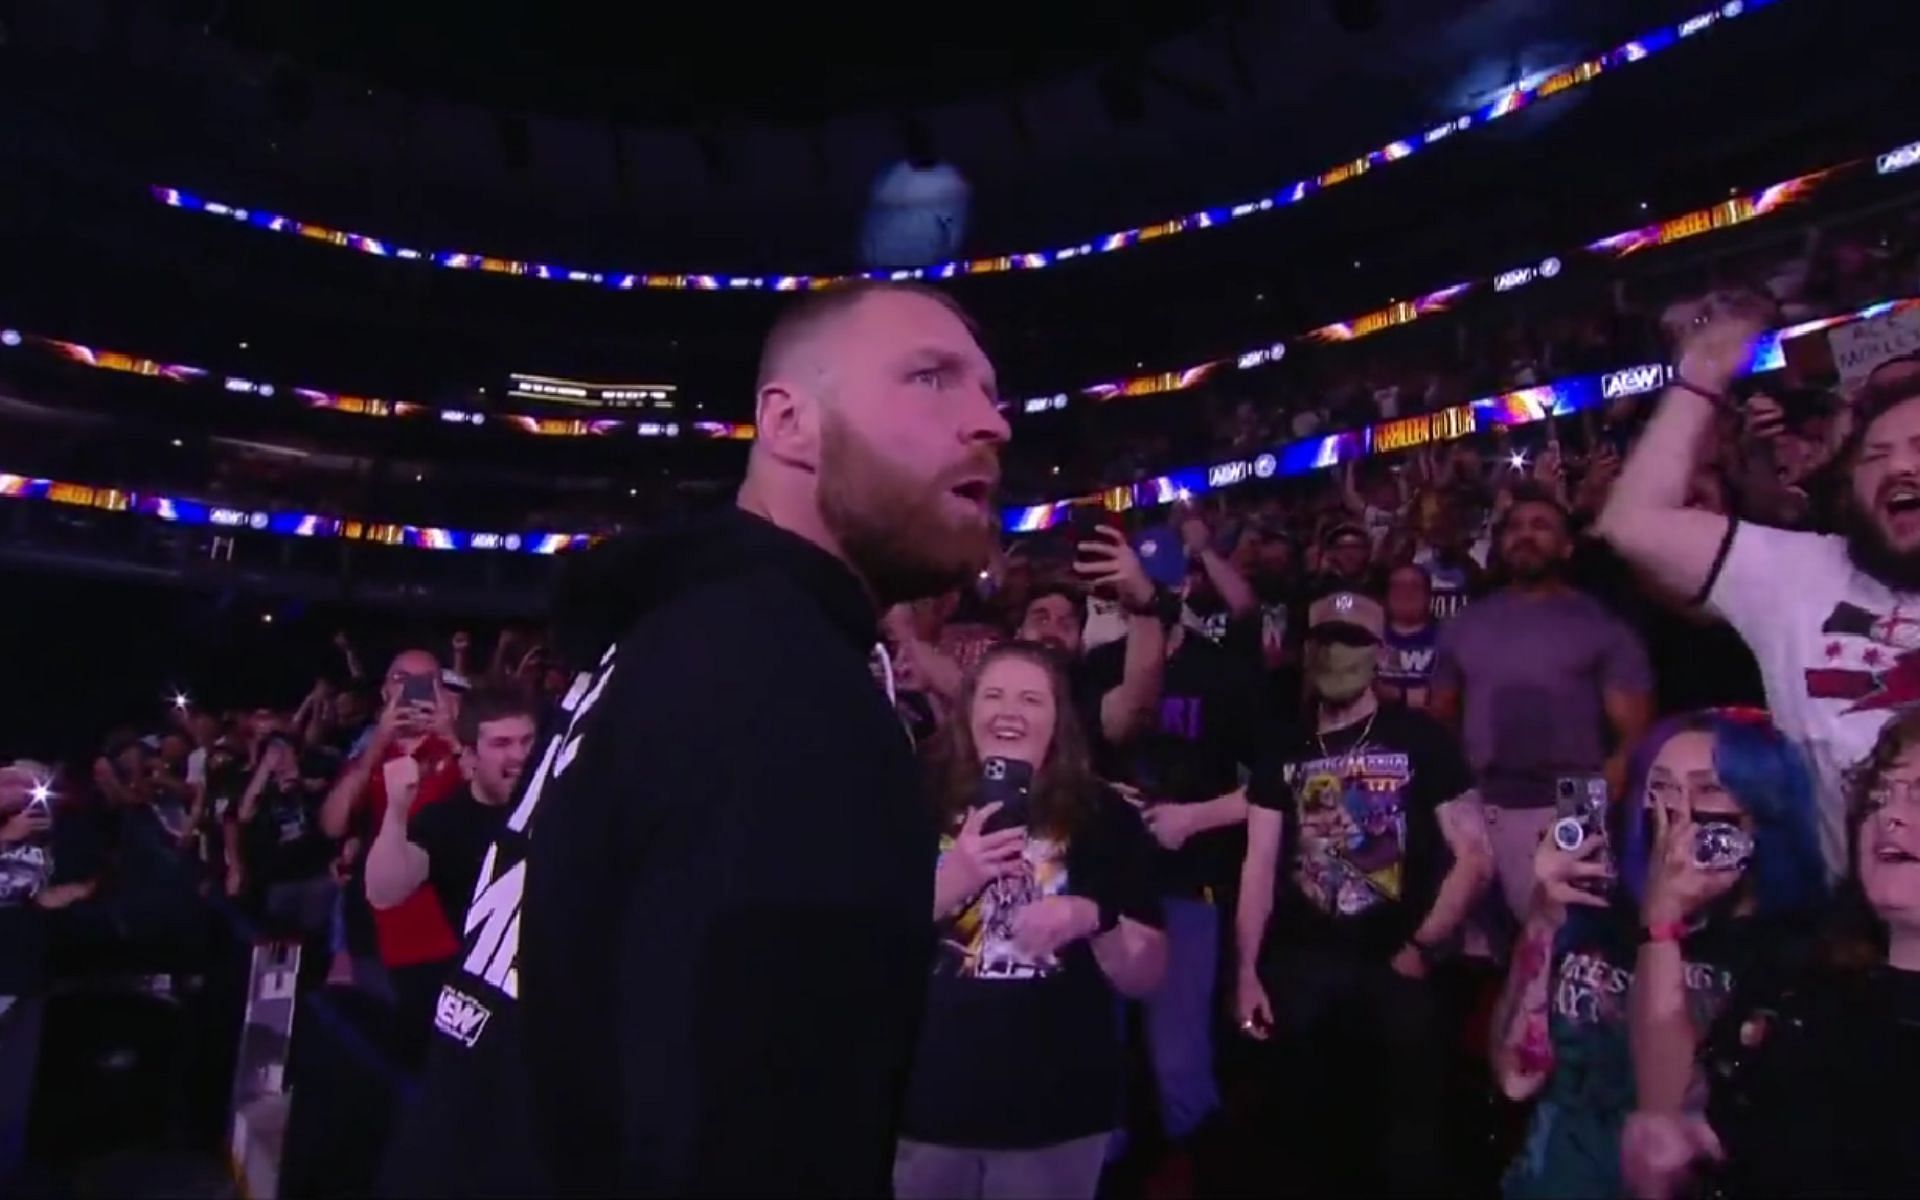 Jon Moxley competed for the Interim AEW World Championship at Forbidden Door earlier.